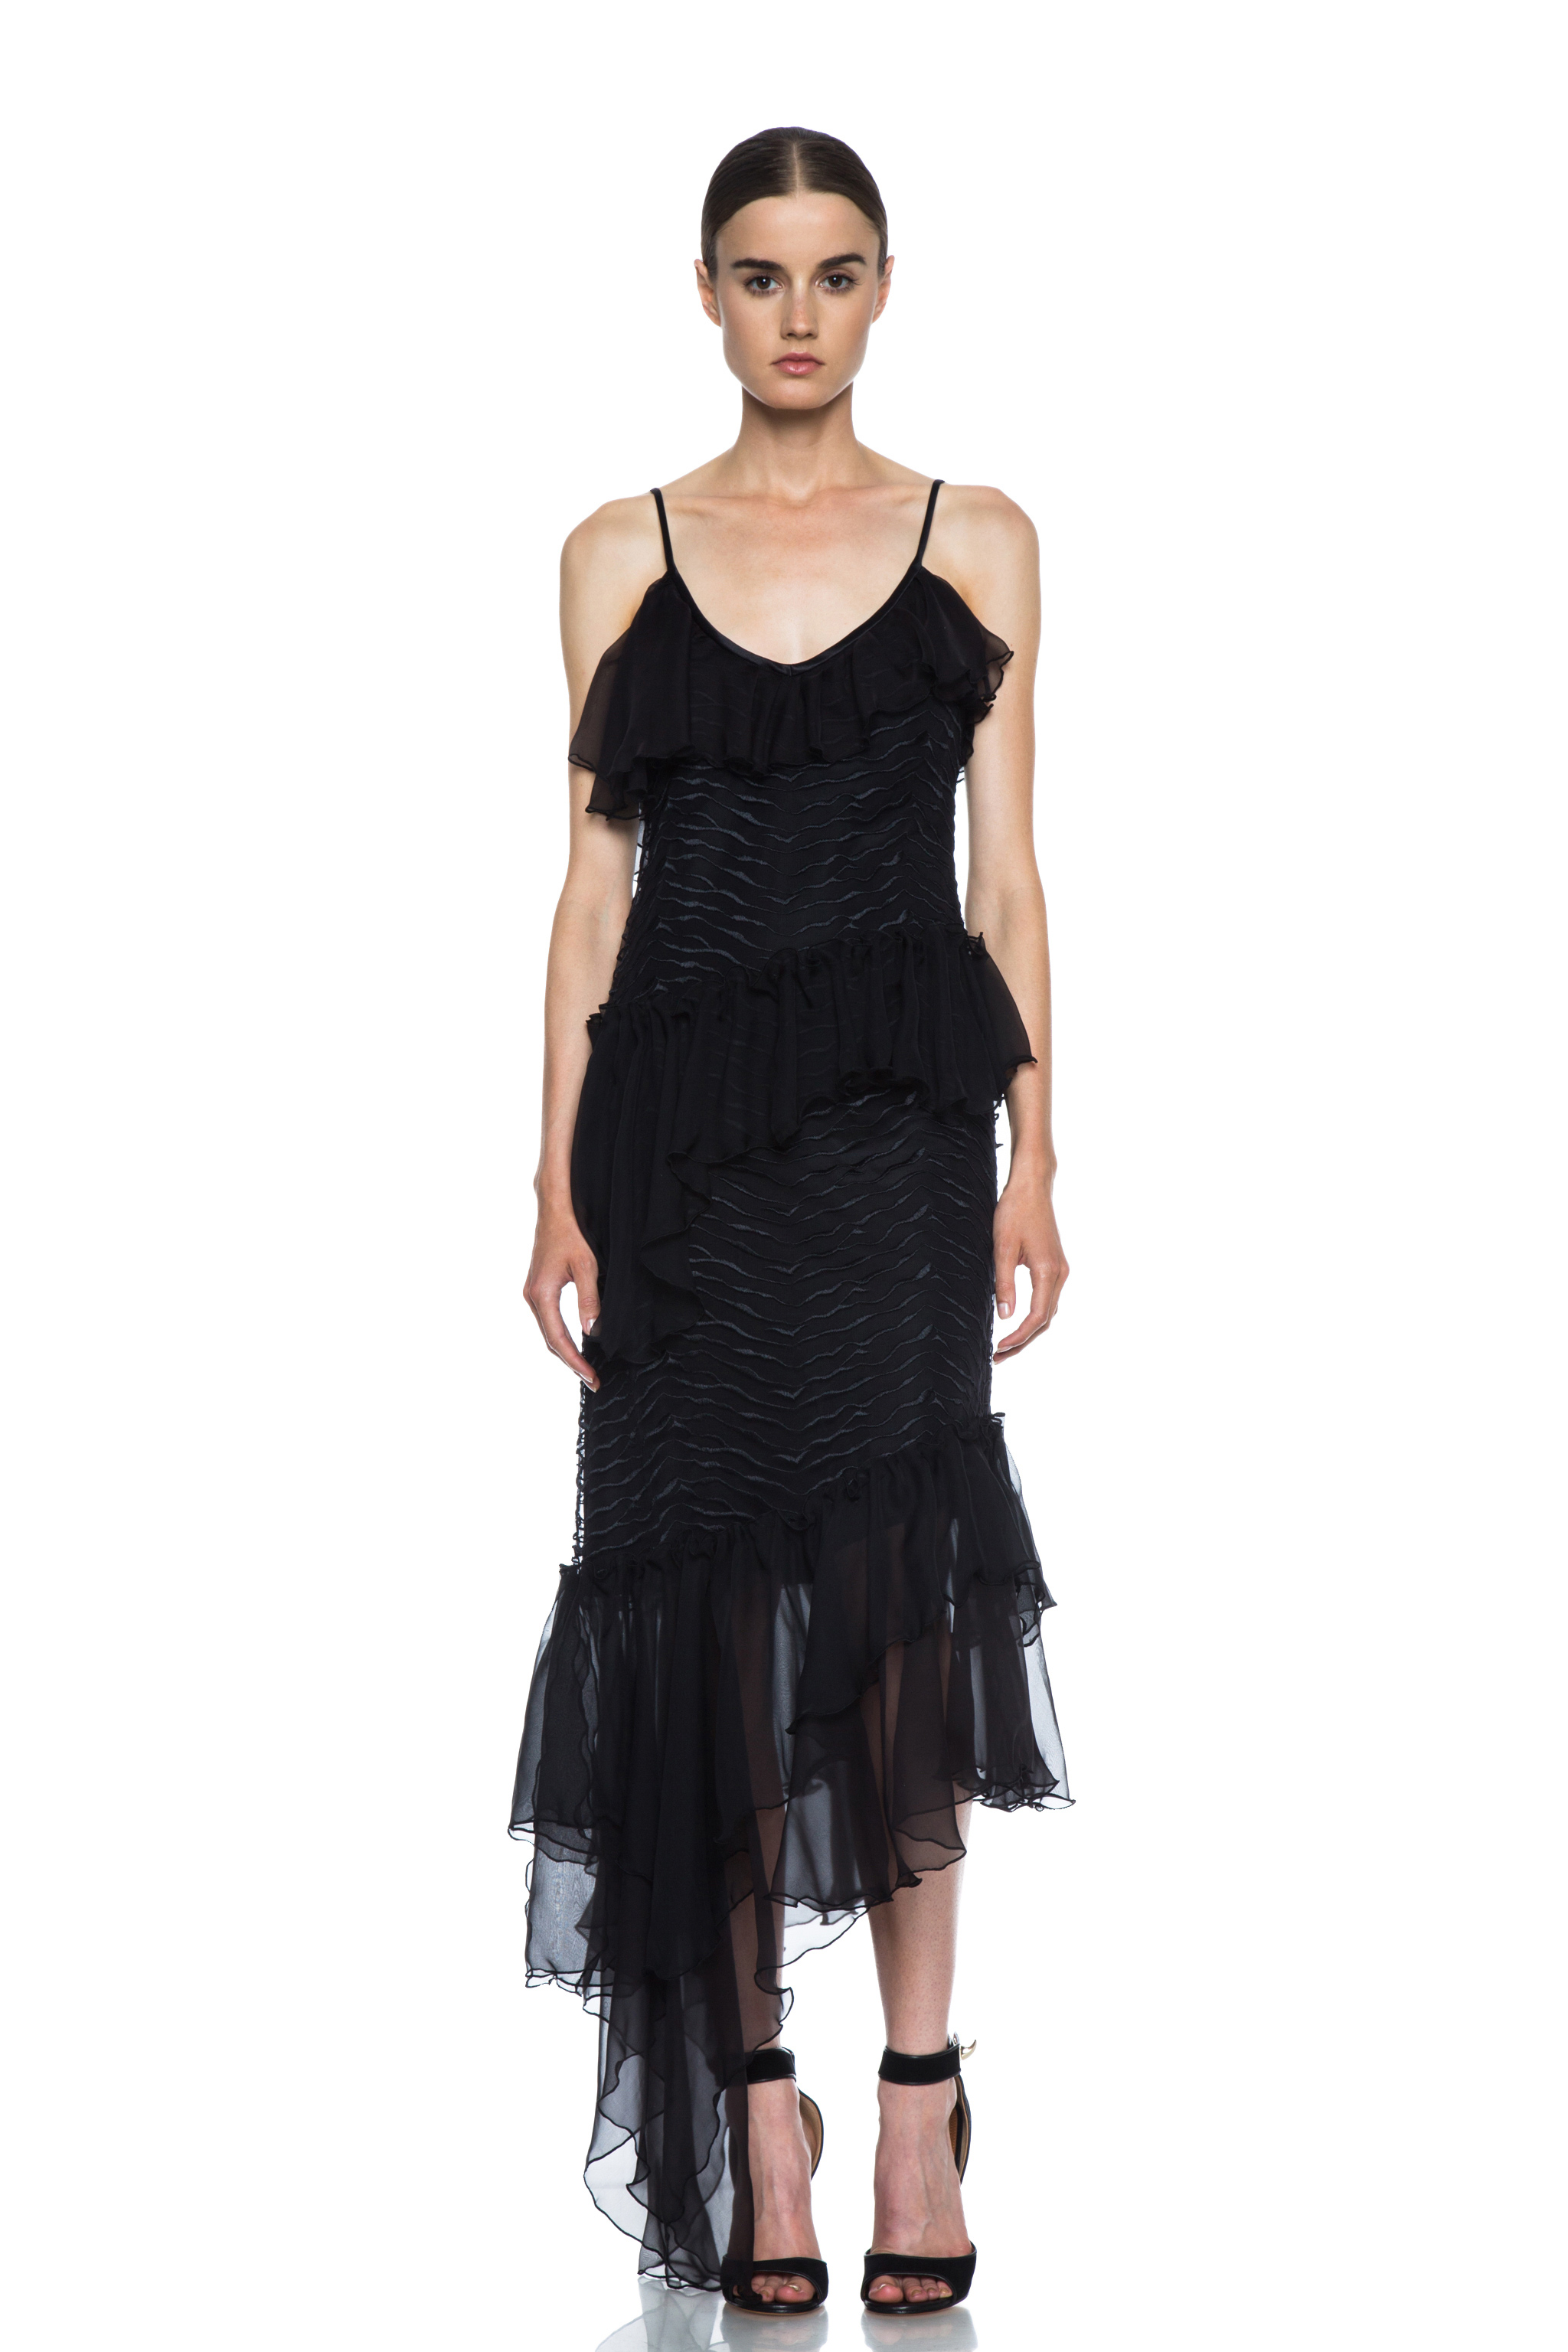 Rodarte Lined Embroidered Dress with Chiffon Ruffles in Black | Lyst